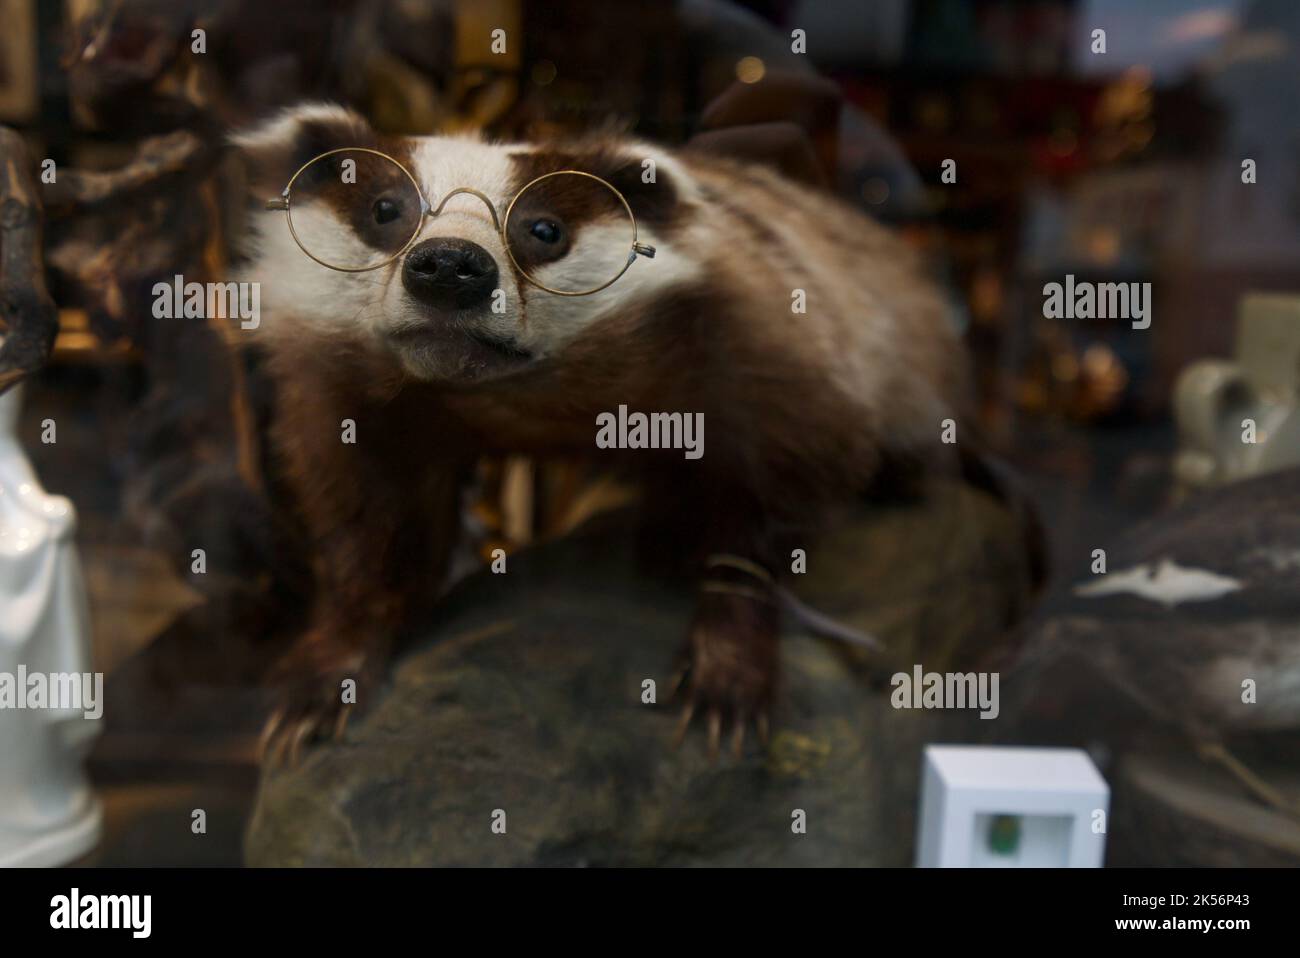 Funny taxidermy badger wearing glasses in an antique shop (Vintage Anthropomorphic Taxidermy) Stock Photo